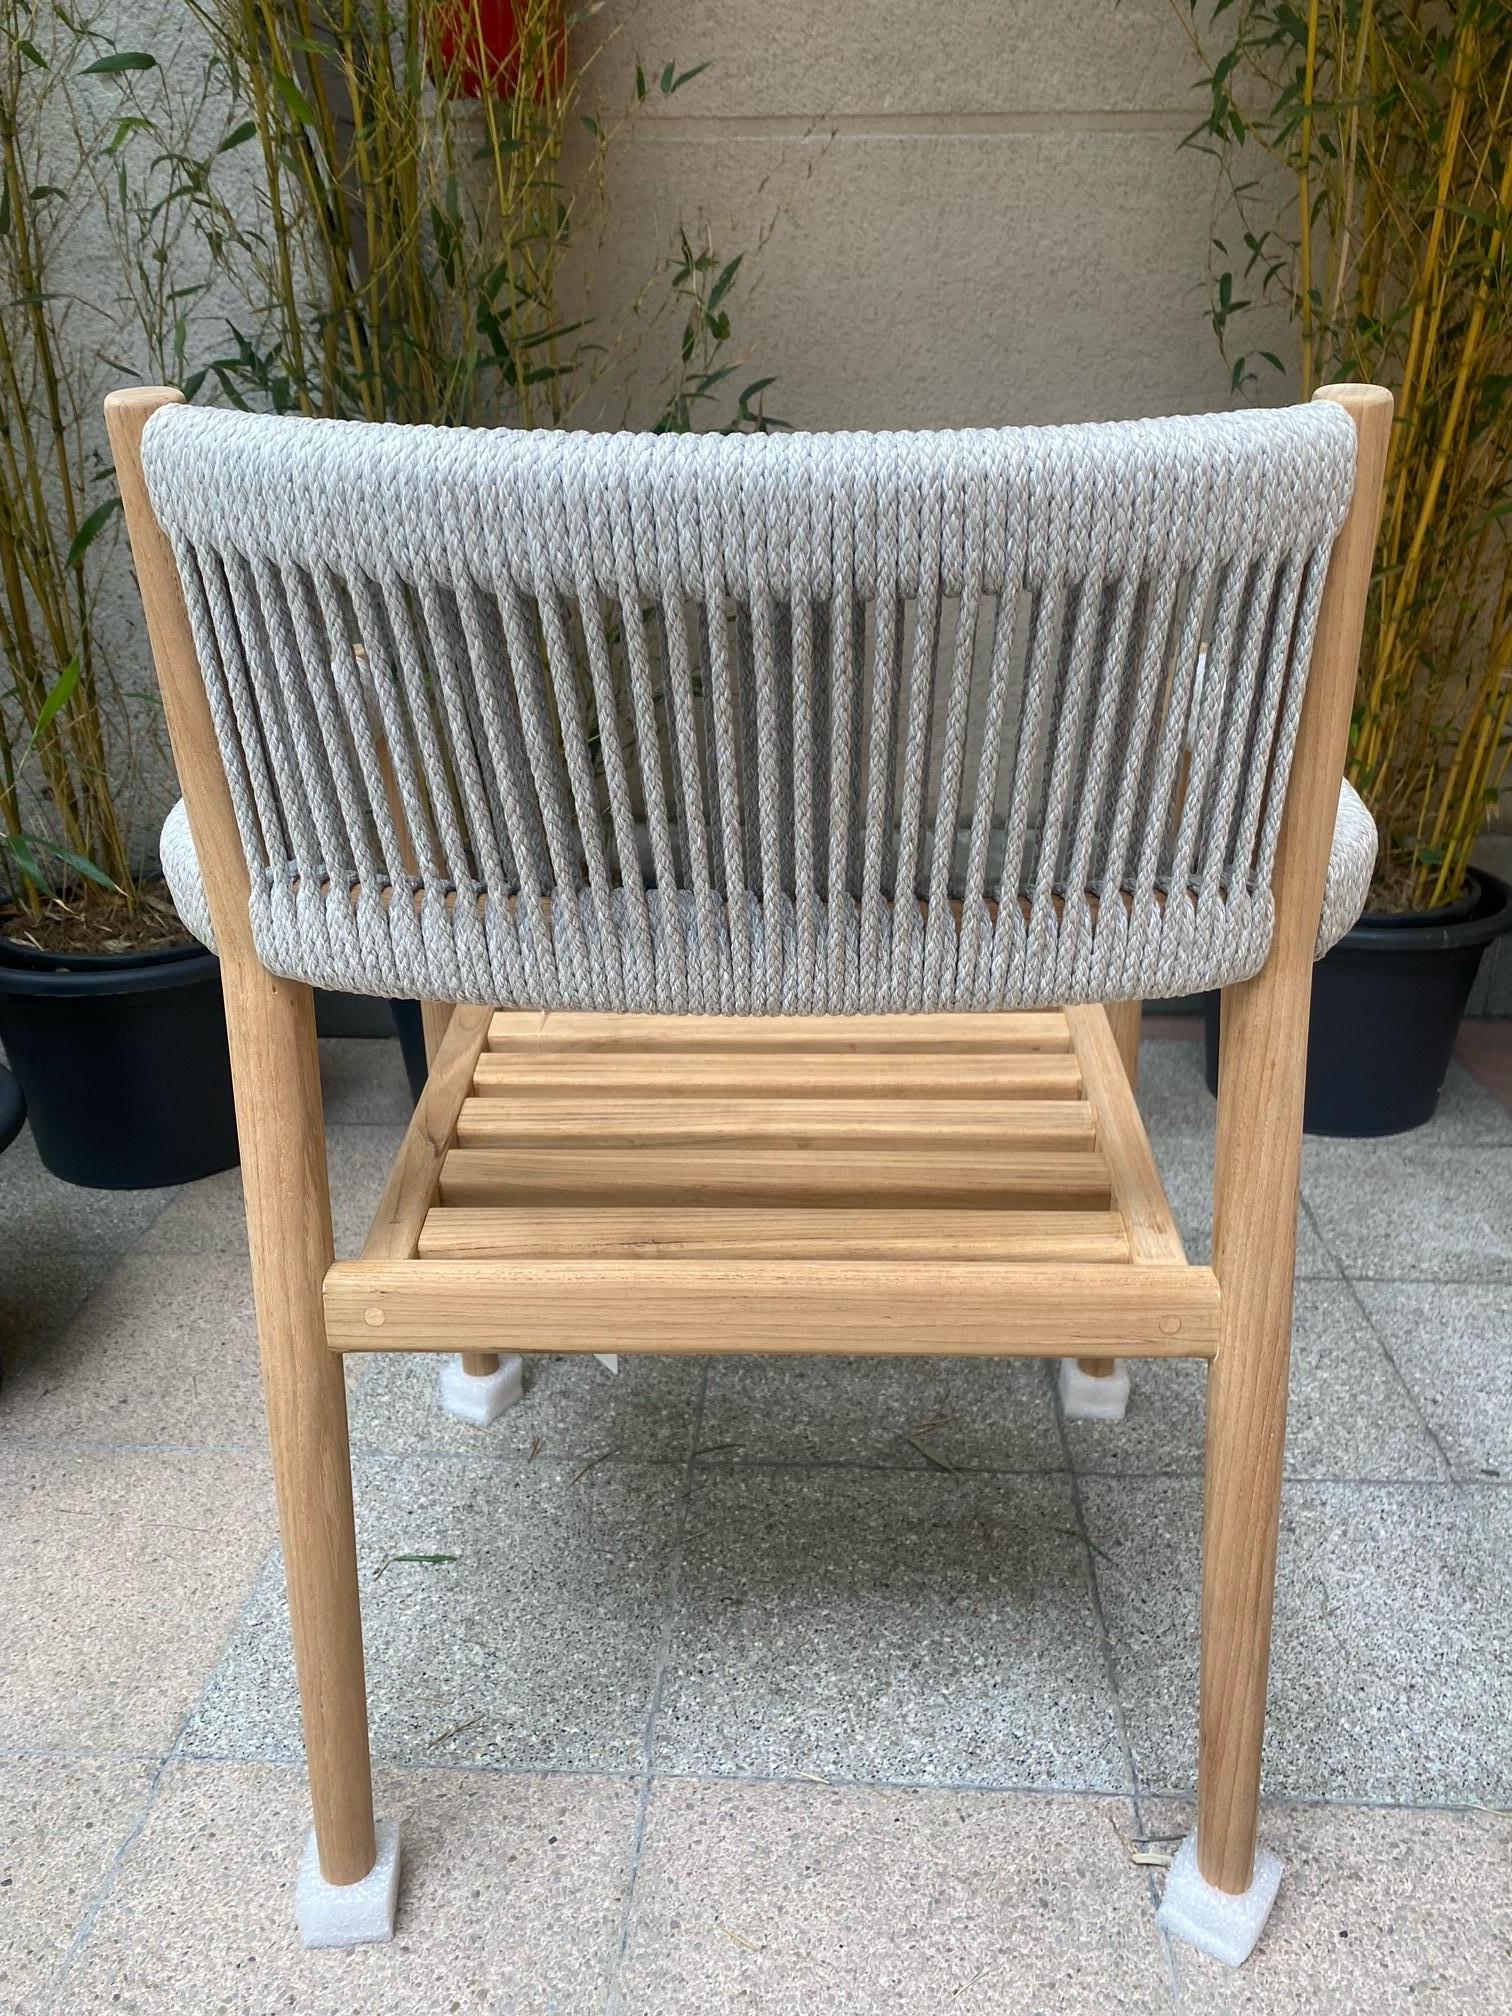 Rodolfo Dordoni Armchair 474 dine out chair -  Cassina edition In Excellent Condition For Sale In Saint ouen, FR